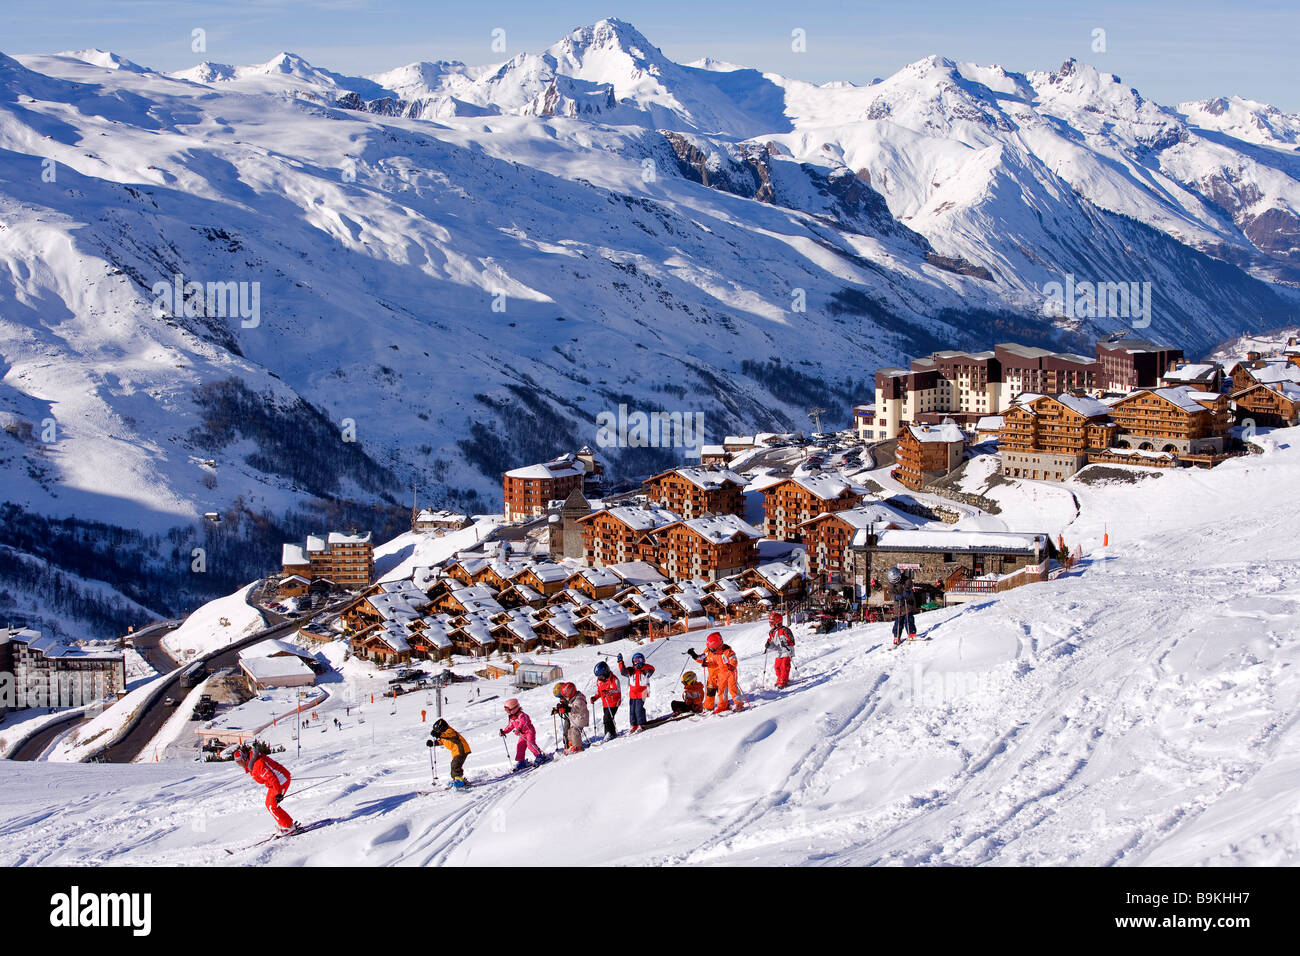 France, Savoie, Les Menuires, Reberty Districts and Club Med, Massif de la Vanoise in the background Stock Photo